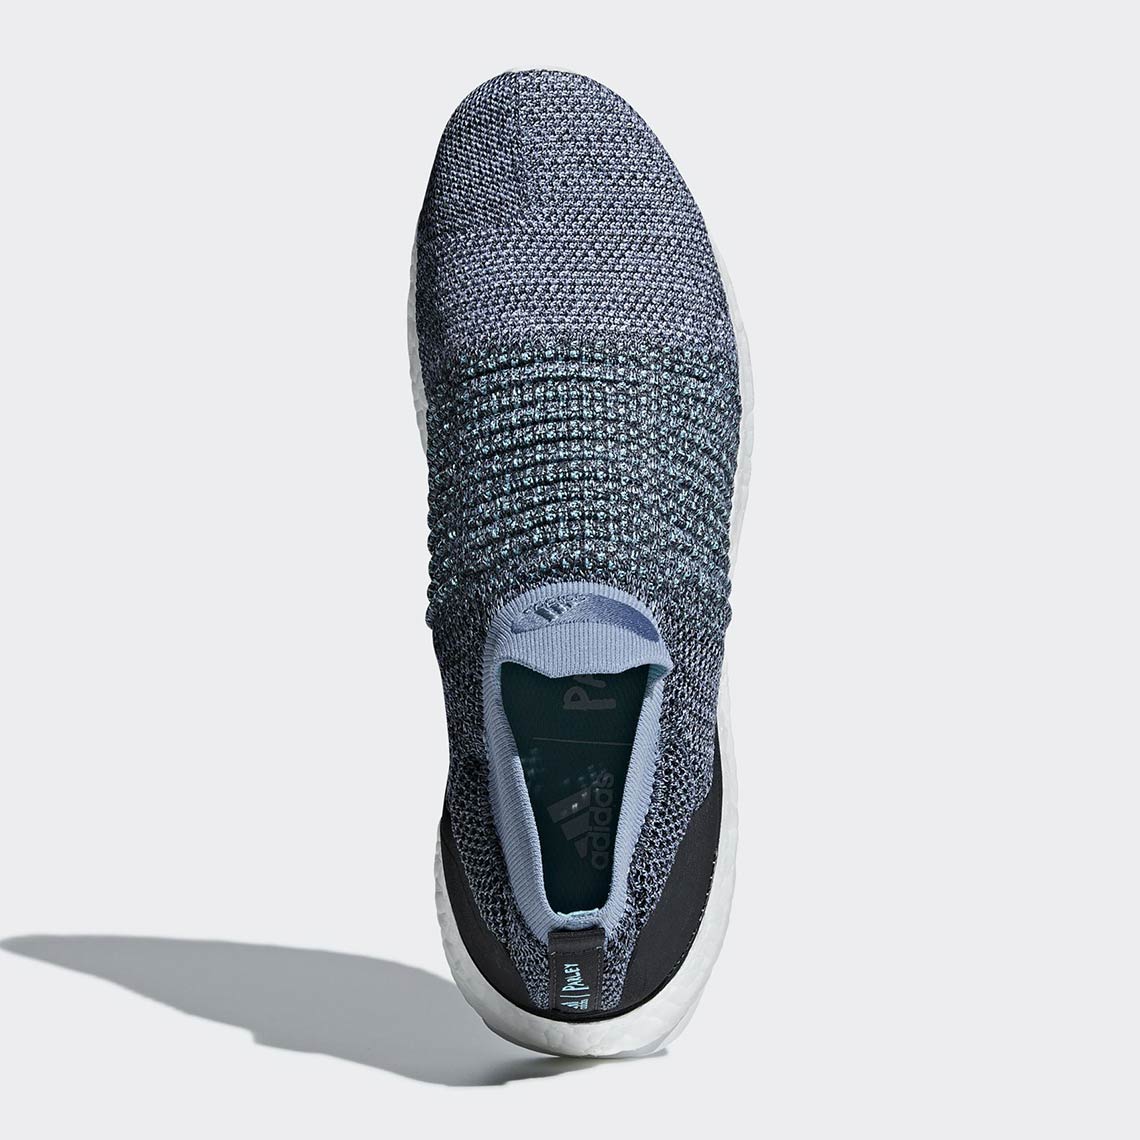 ultraboost parley laceless